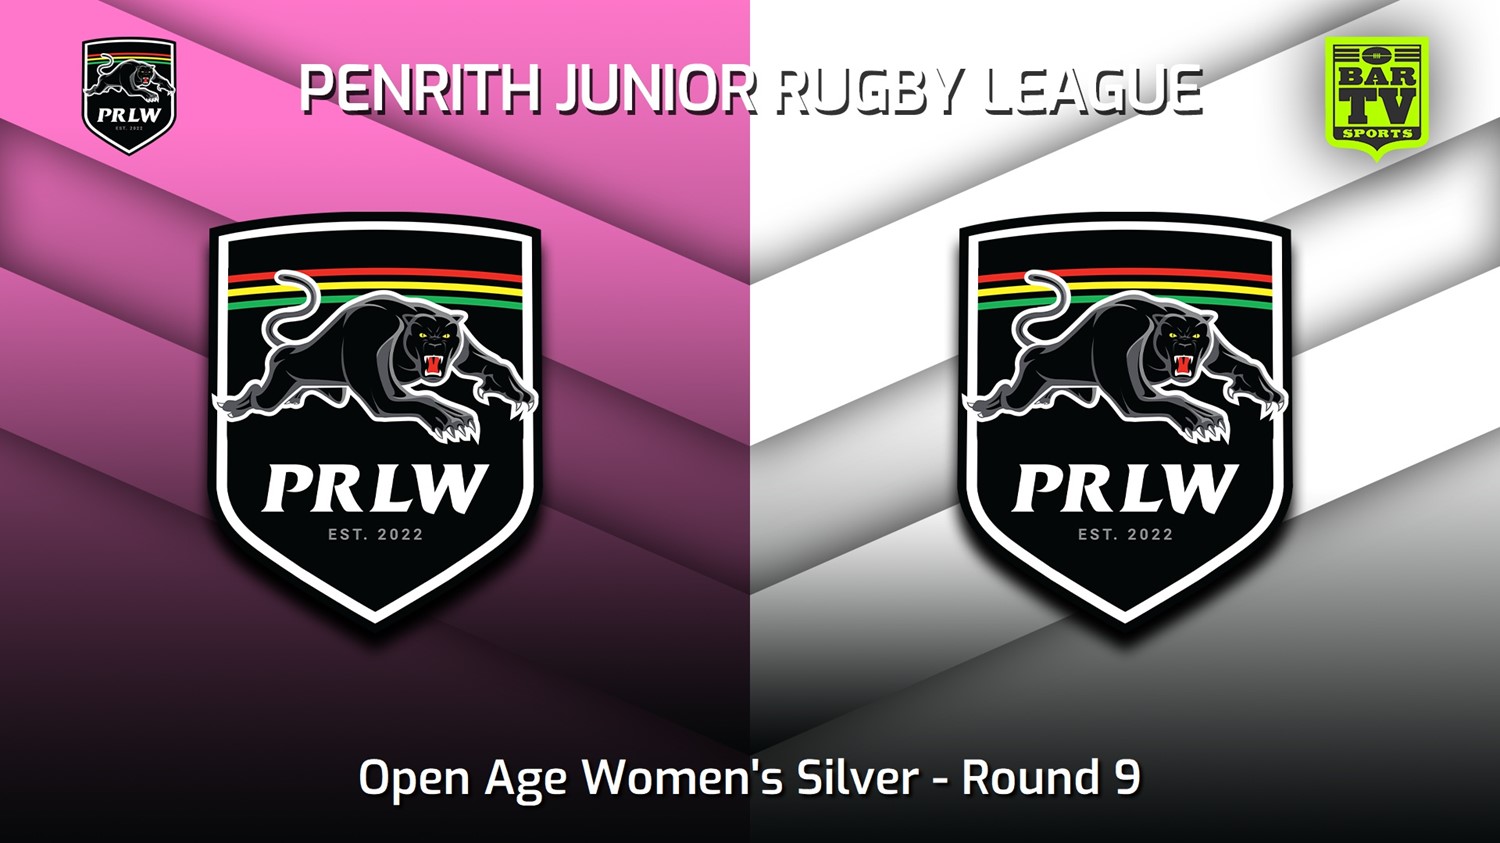 230702-Round 9 - Open Age Women's Silver - Penrith RLW Pink v Penrith RLW White Minigame Slate Image